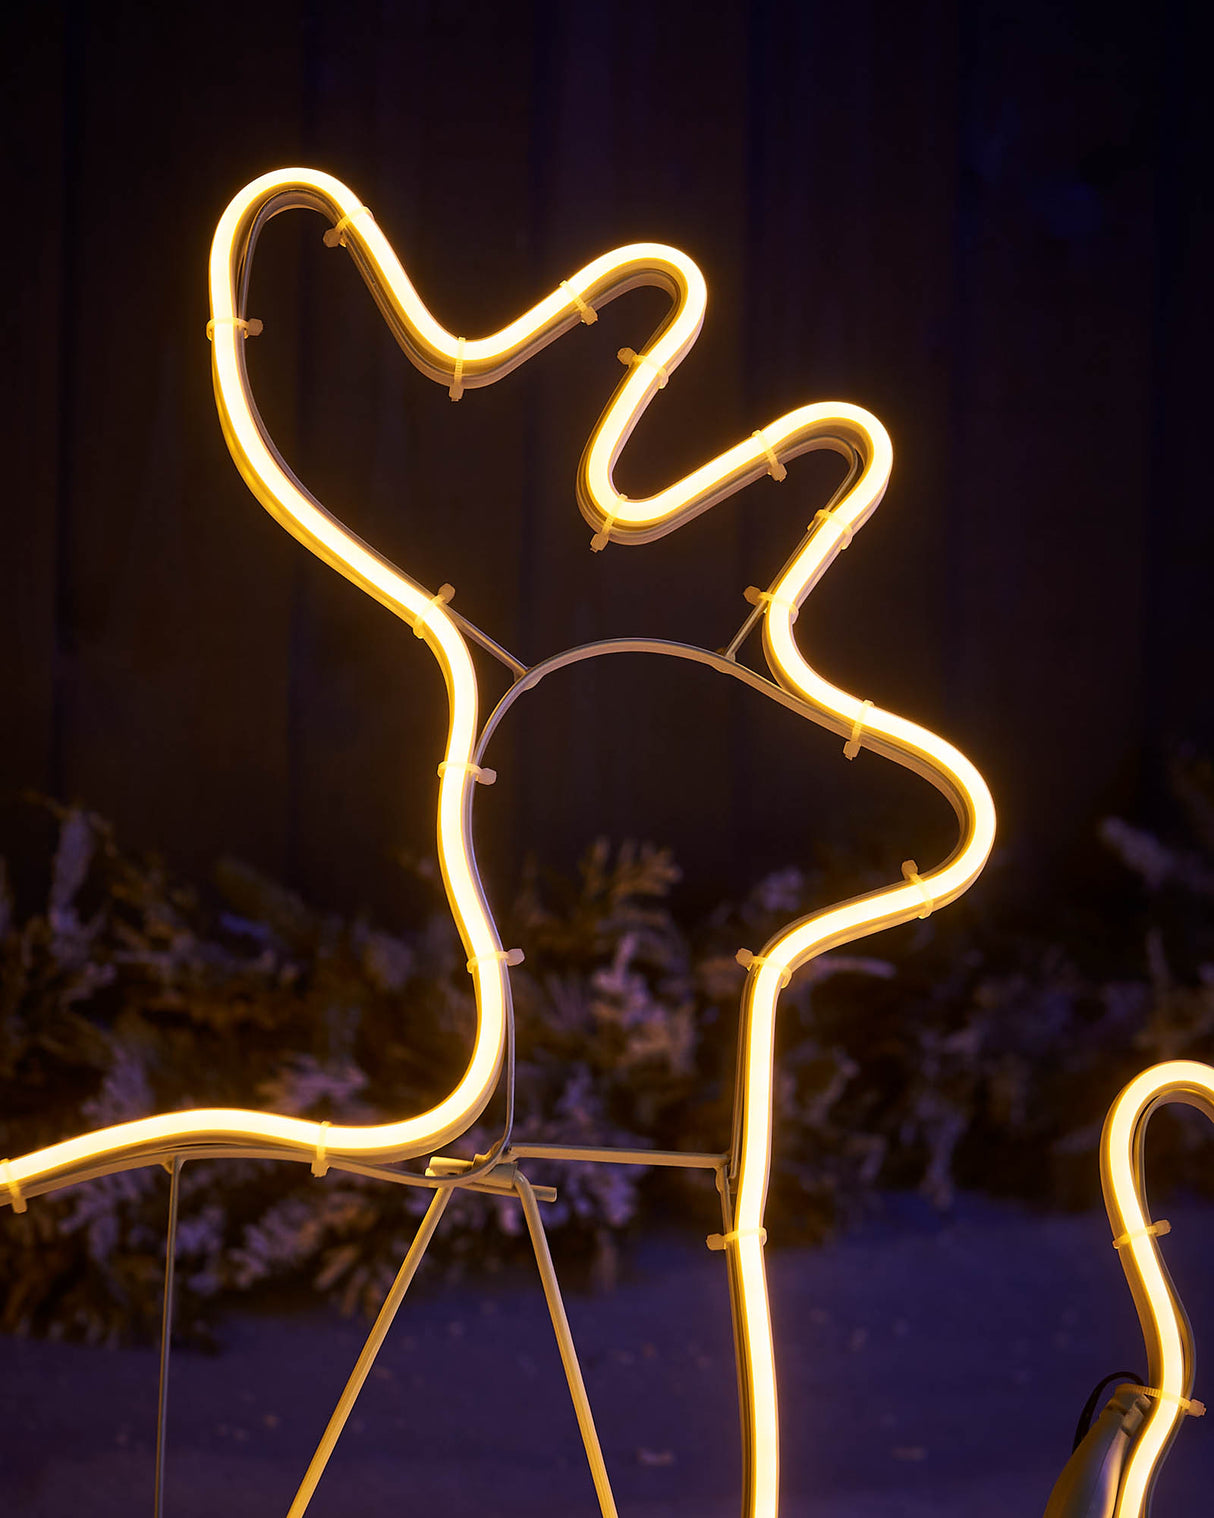 Twin Reindeers with Santa Sleigh Neon Rope Light Silhouette, 2.6 m